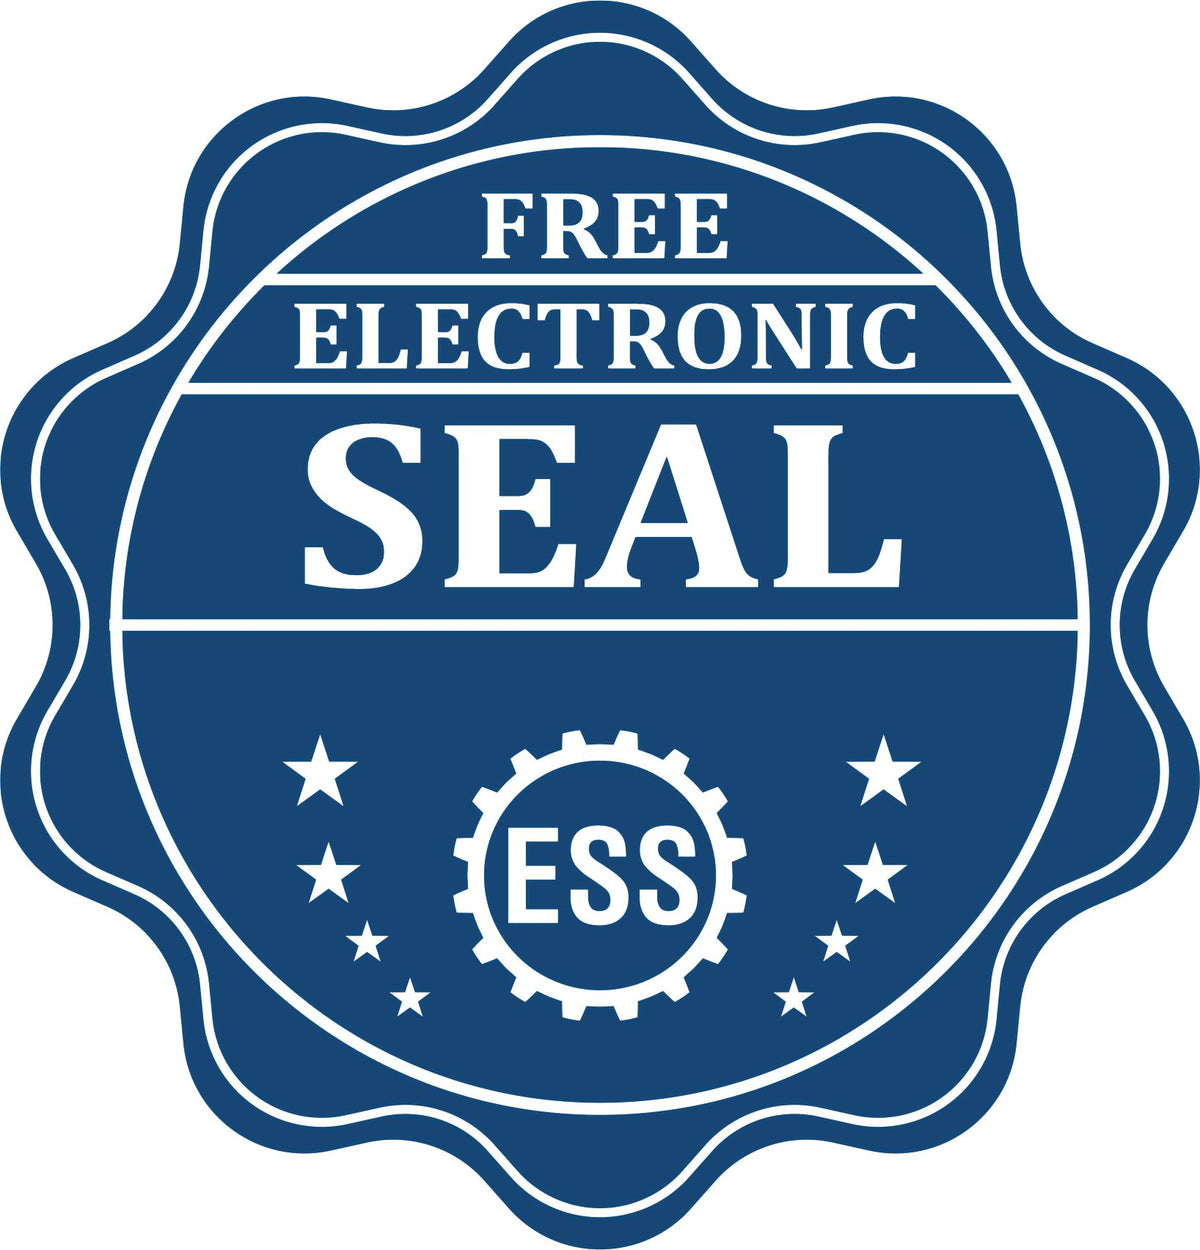 A badge showing a free electronic seal for the Guam Desk Architect Embossing Seal with stars and the ESS gear on the emblem.